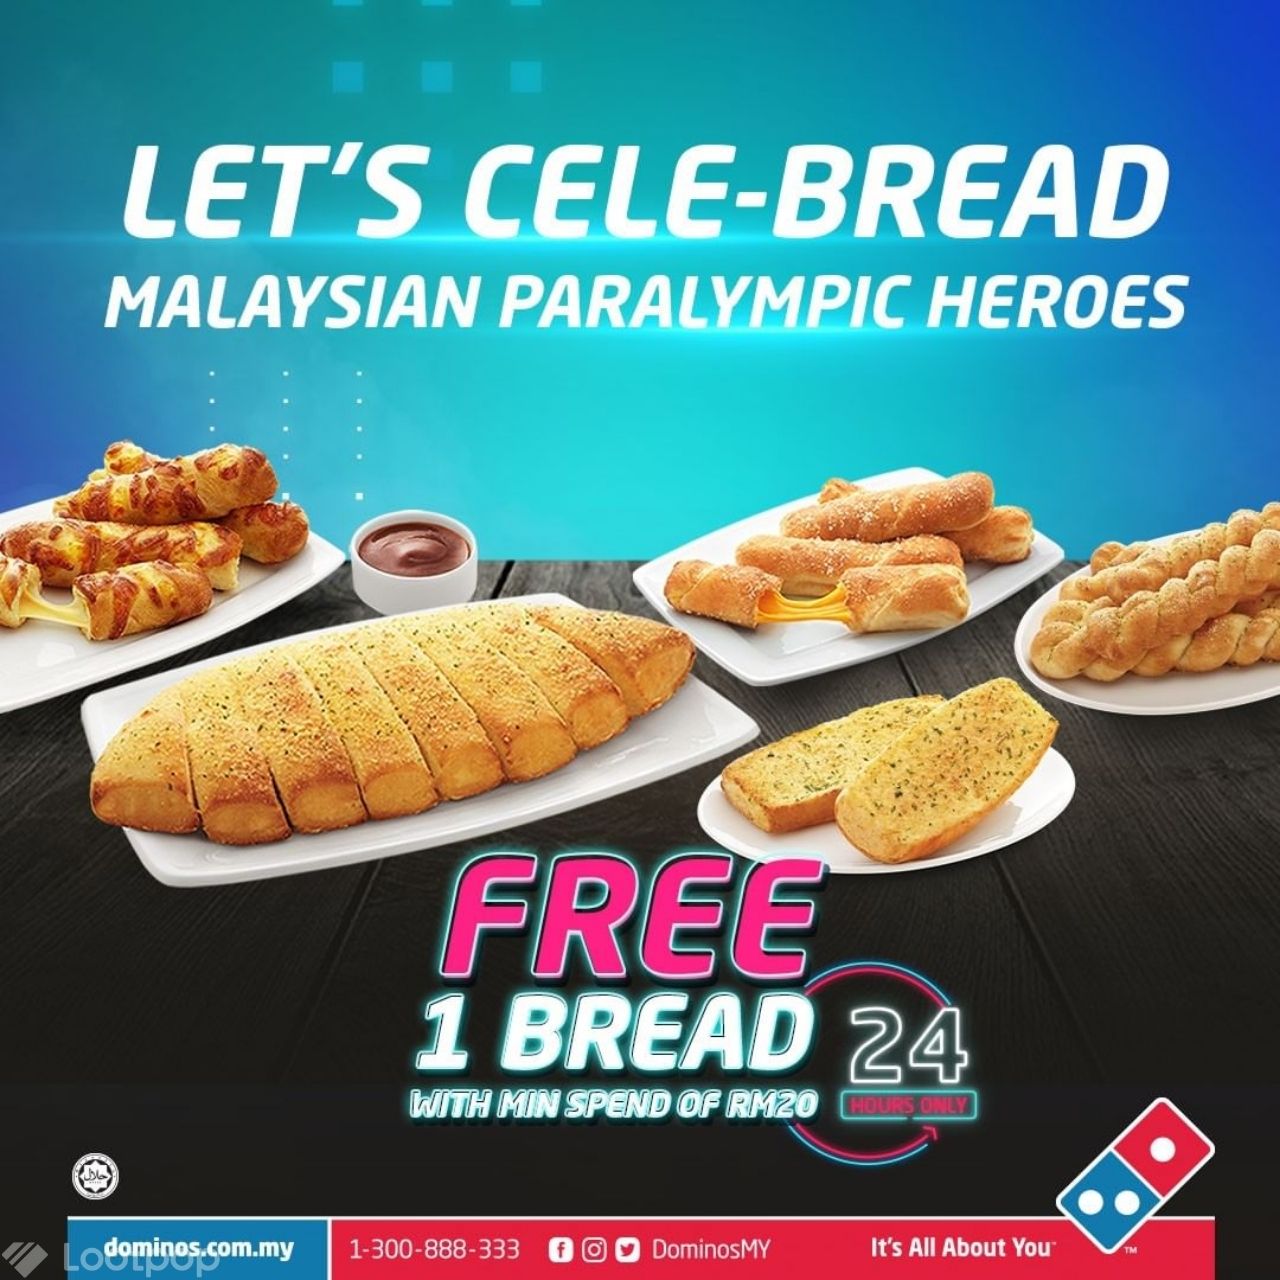 Free Bread from Domino's Pizza